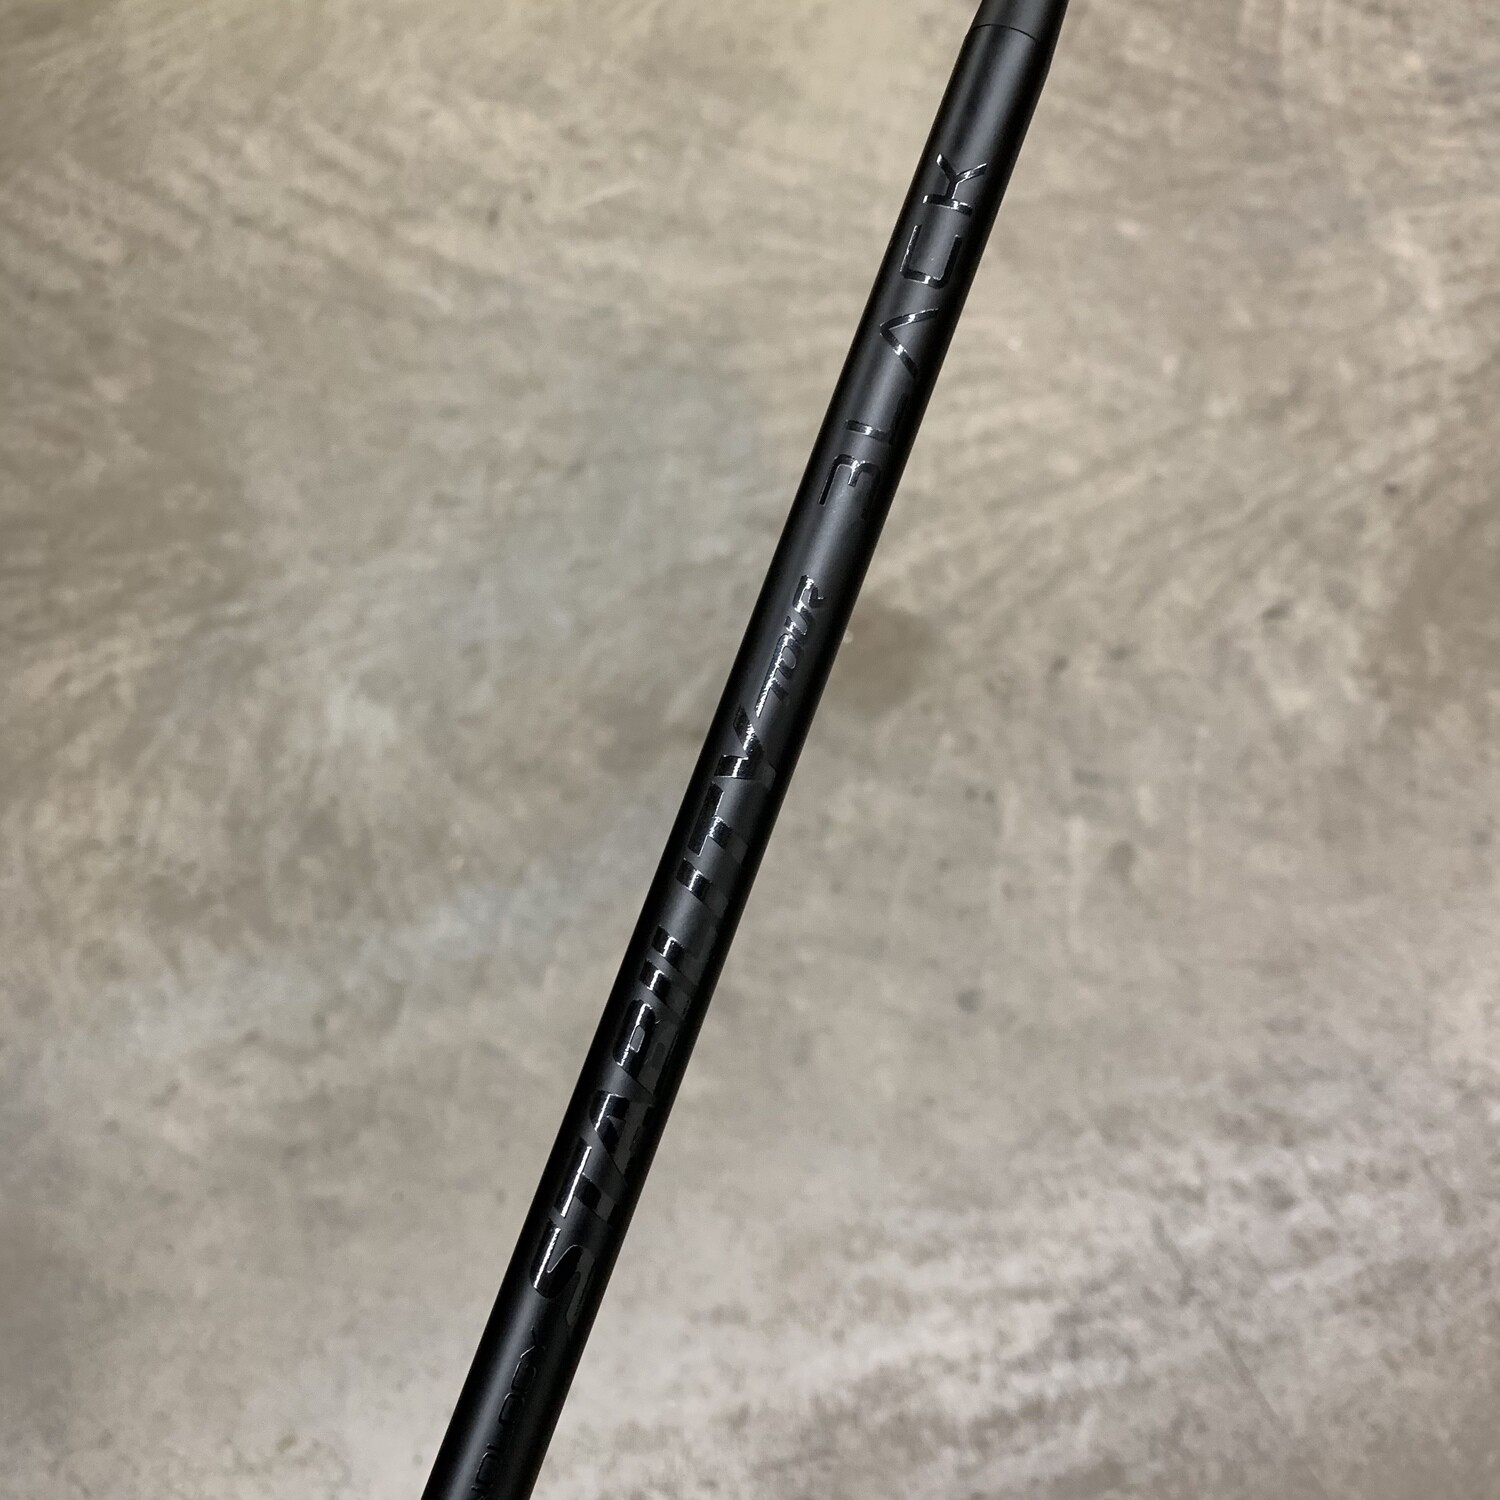 Limited Edition Blacked Out Tour Stability  Shaft